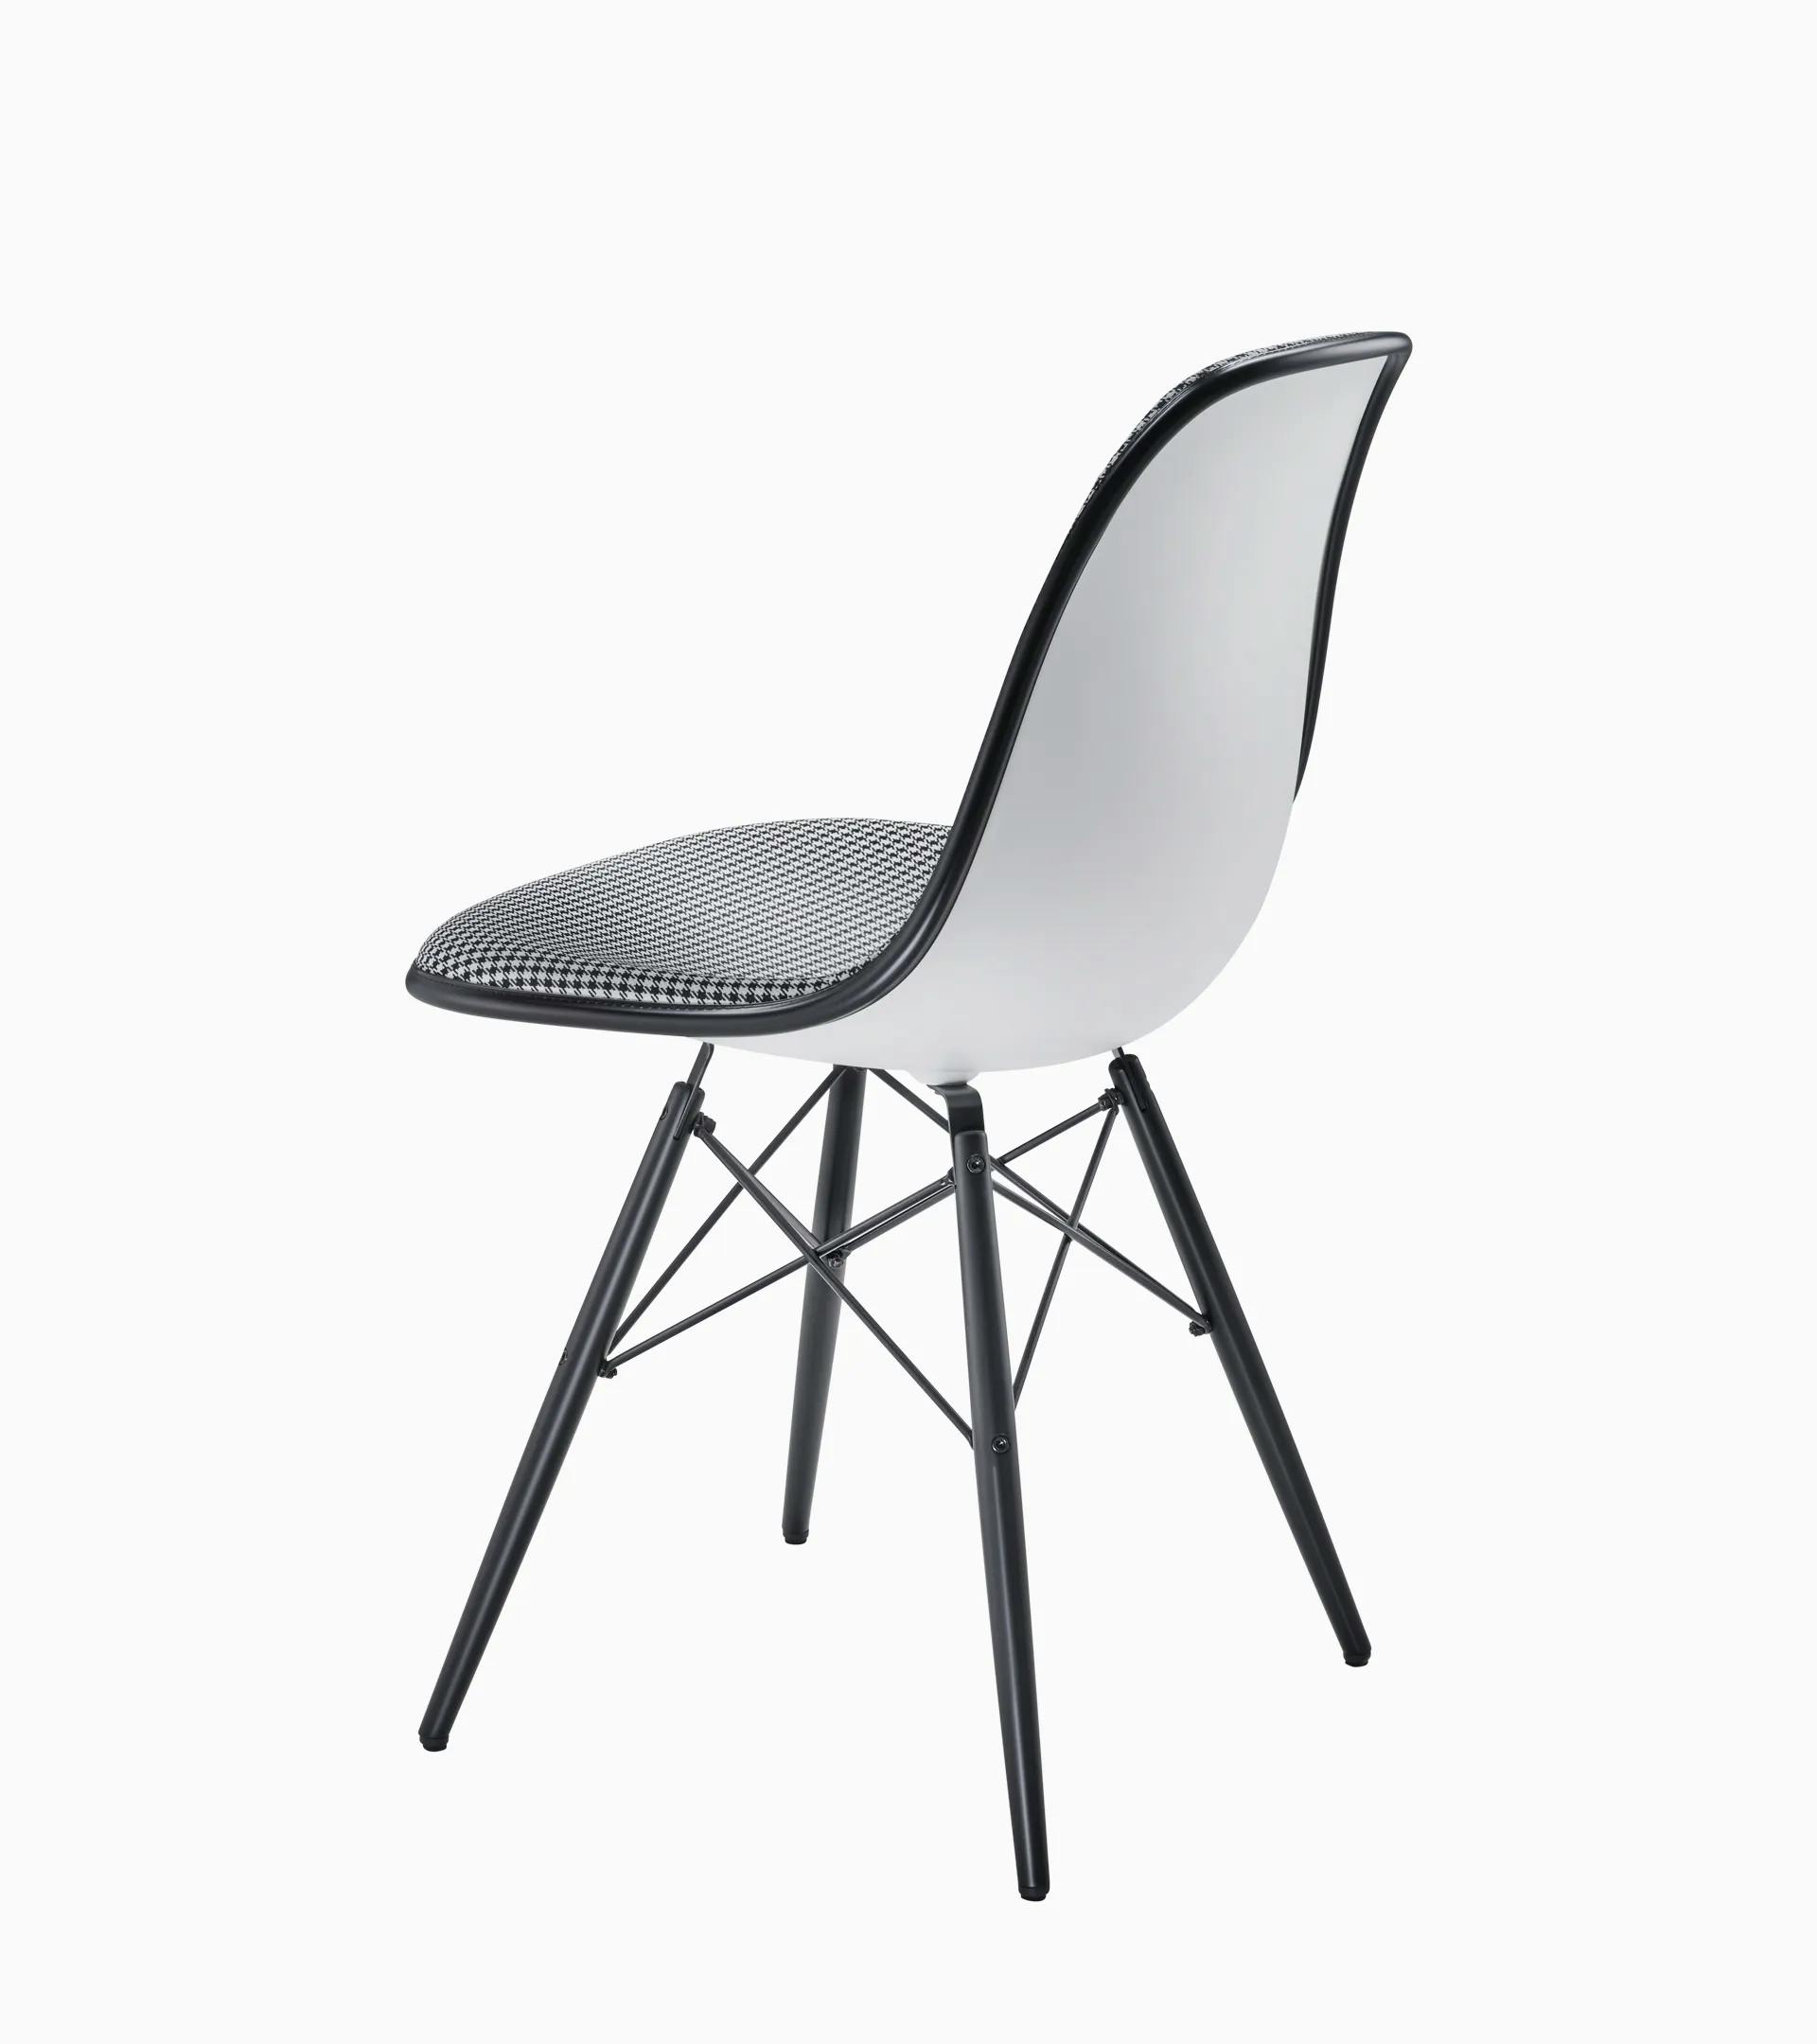 Eames Plastic Side Chair Pepita Edition – Limited Edition 3